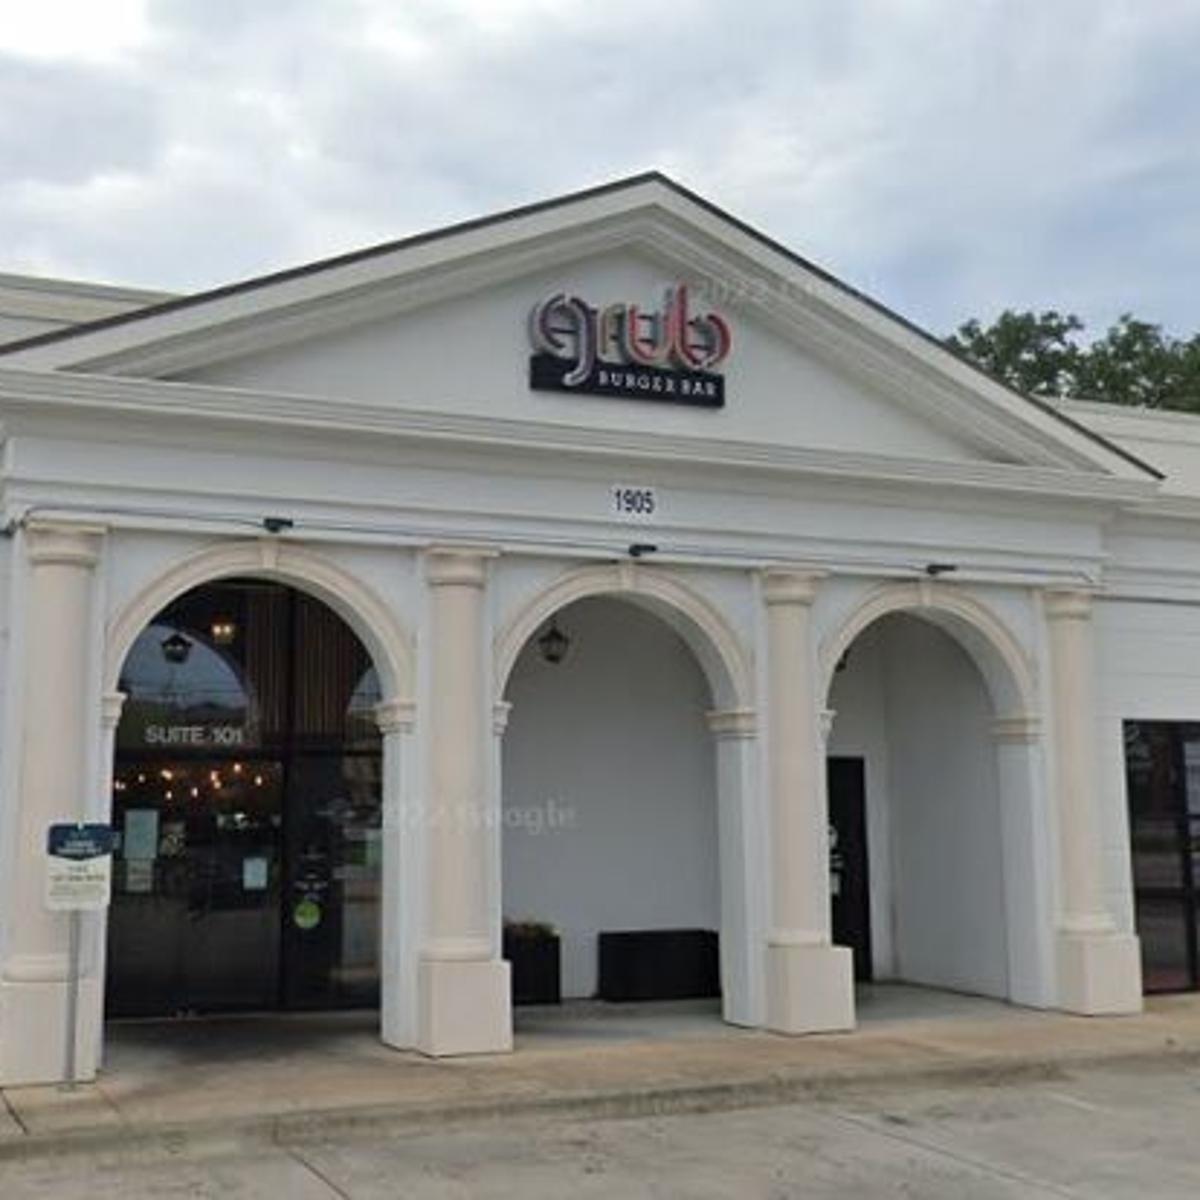 Burger Tyme Closing Current Lafayette Restaurant to Relocate